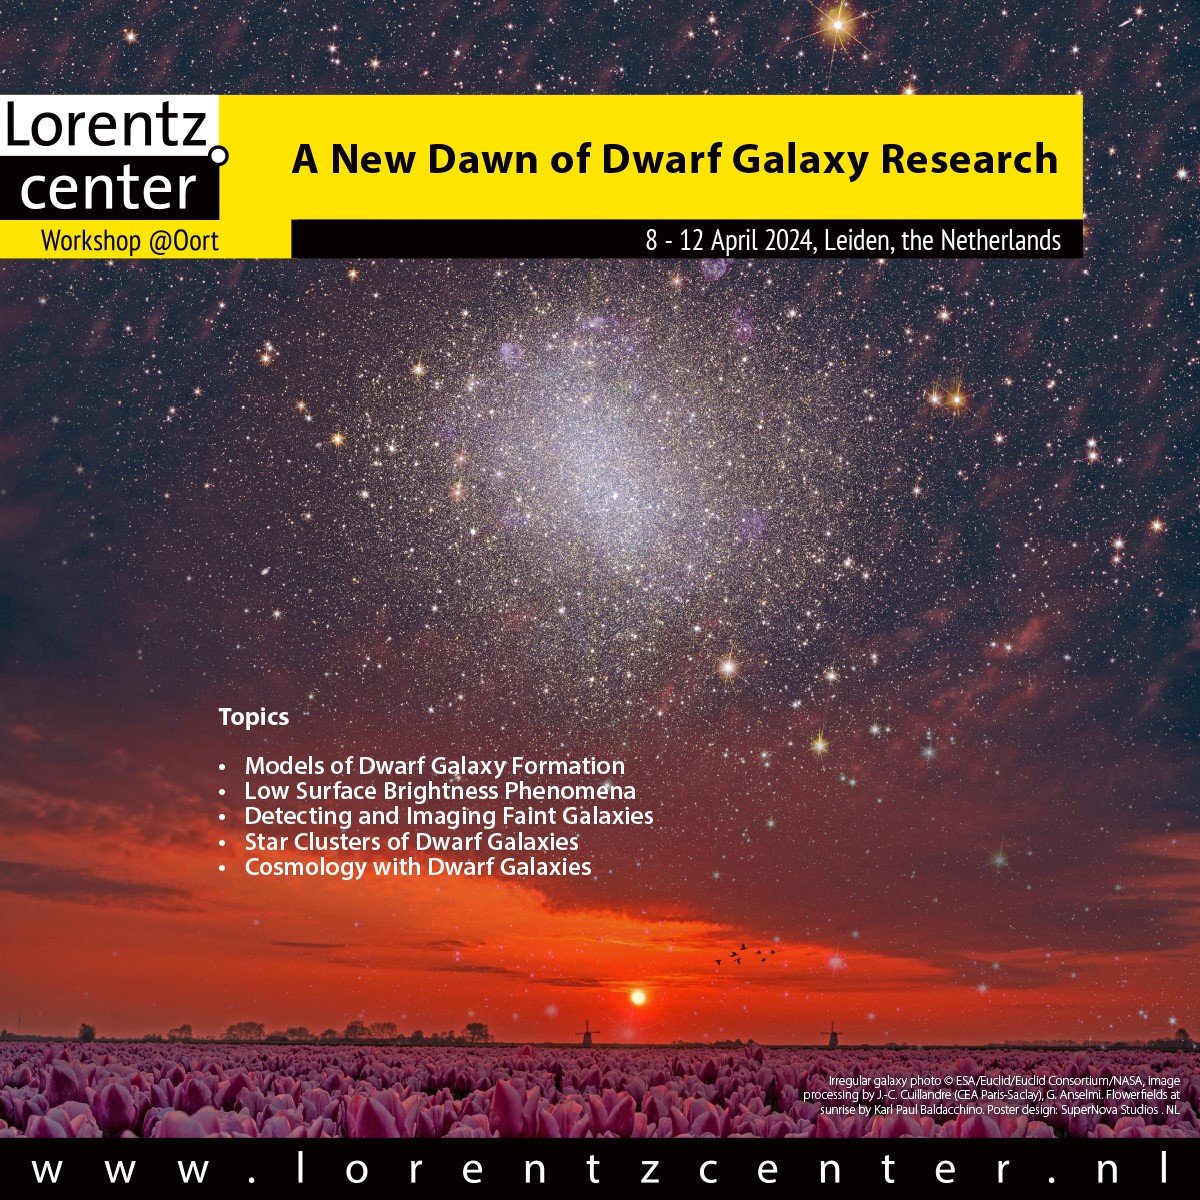 Researchers with expertise in dwarf galaxies come together to discuss needed observations, simulations, detection methods, and metrics to test cosmology across different cosmic environments. bit.ly/4cKCqRx @VoltarCH @KatjaFah @teymursaif @MariaAngelaRaj @satellitegalaxy